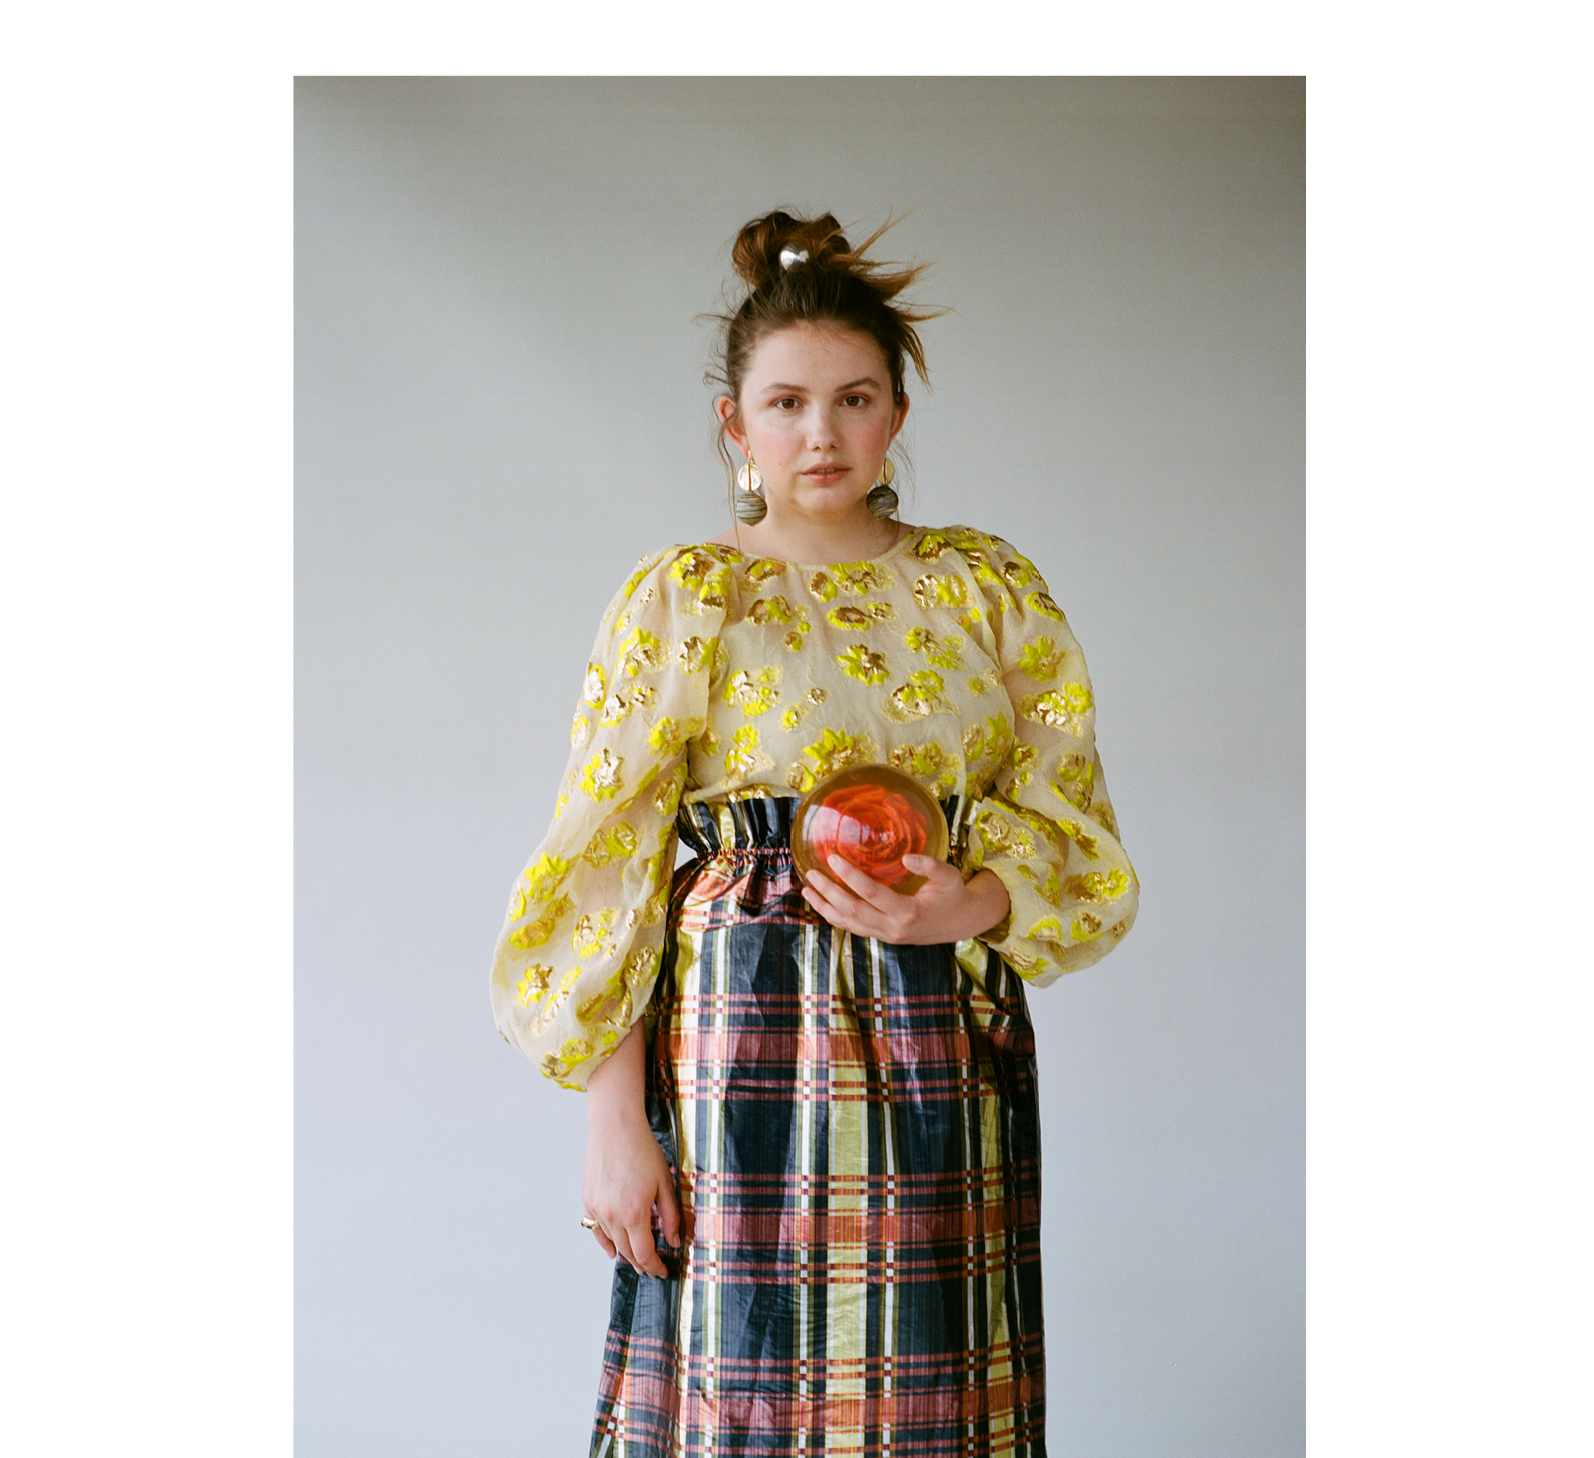 Top by Rachel Comey. Skirt by Maryam Nassir Zadeh from Nonna, Los Angeles. Earrings by Modern Weaving. Ring by Legier from Assembly Los Angeles. Hair tie by Saskia Diez from Assembly Los Angeles.